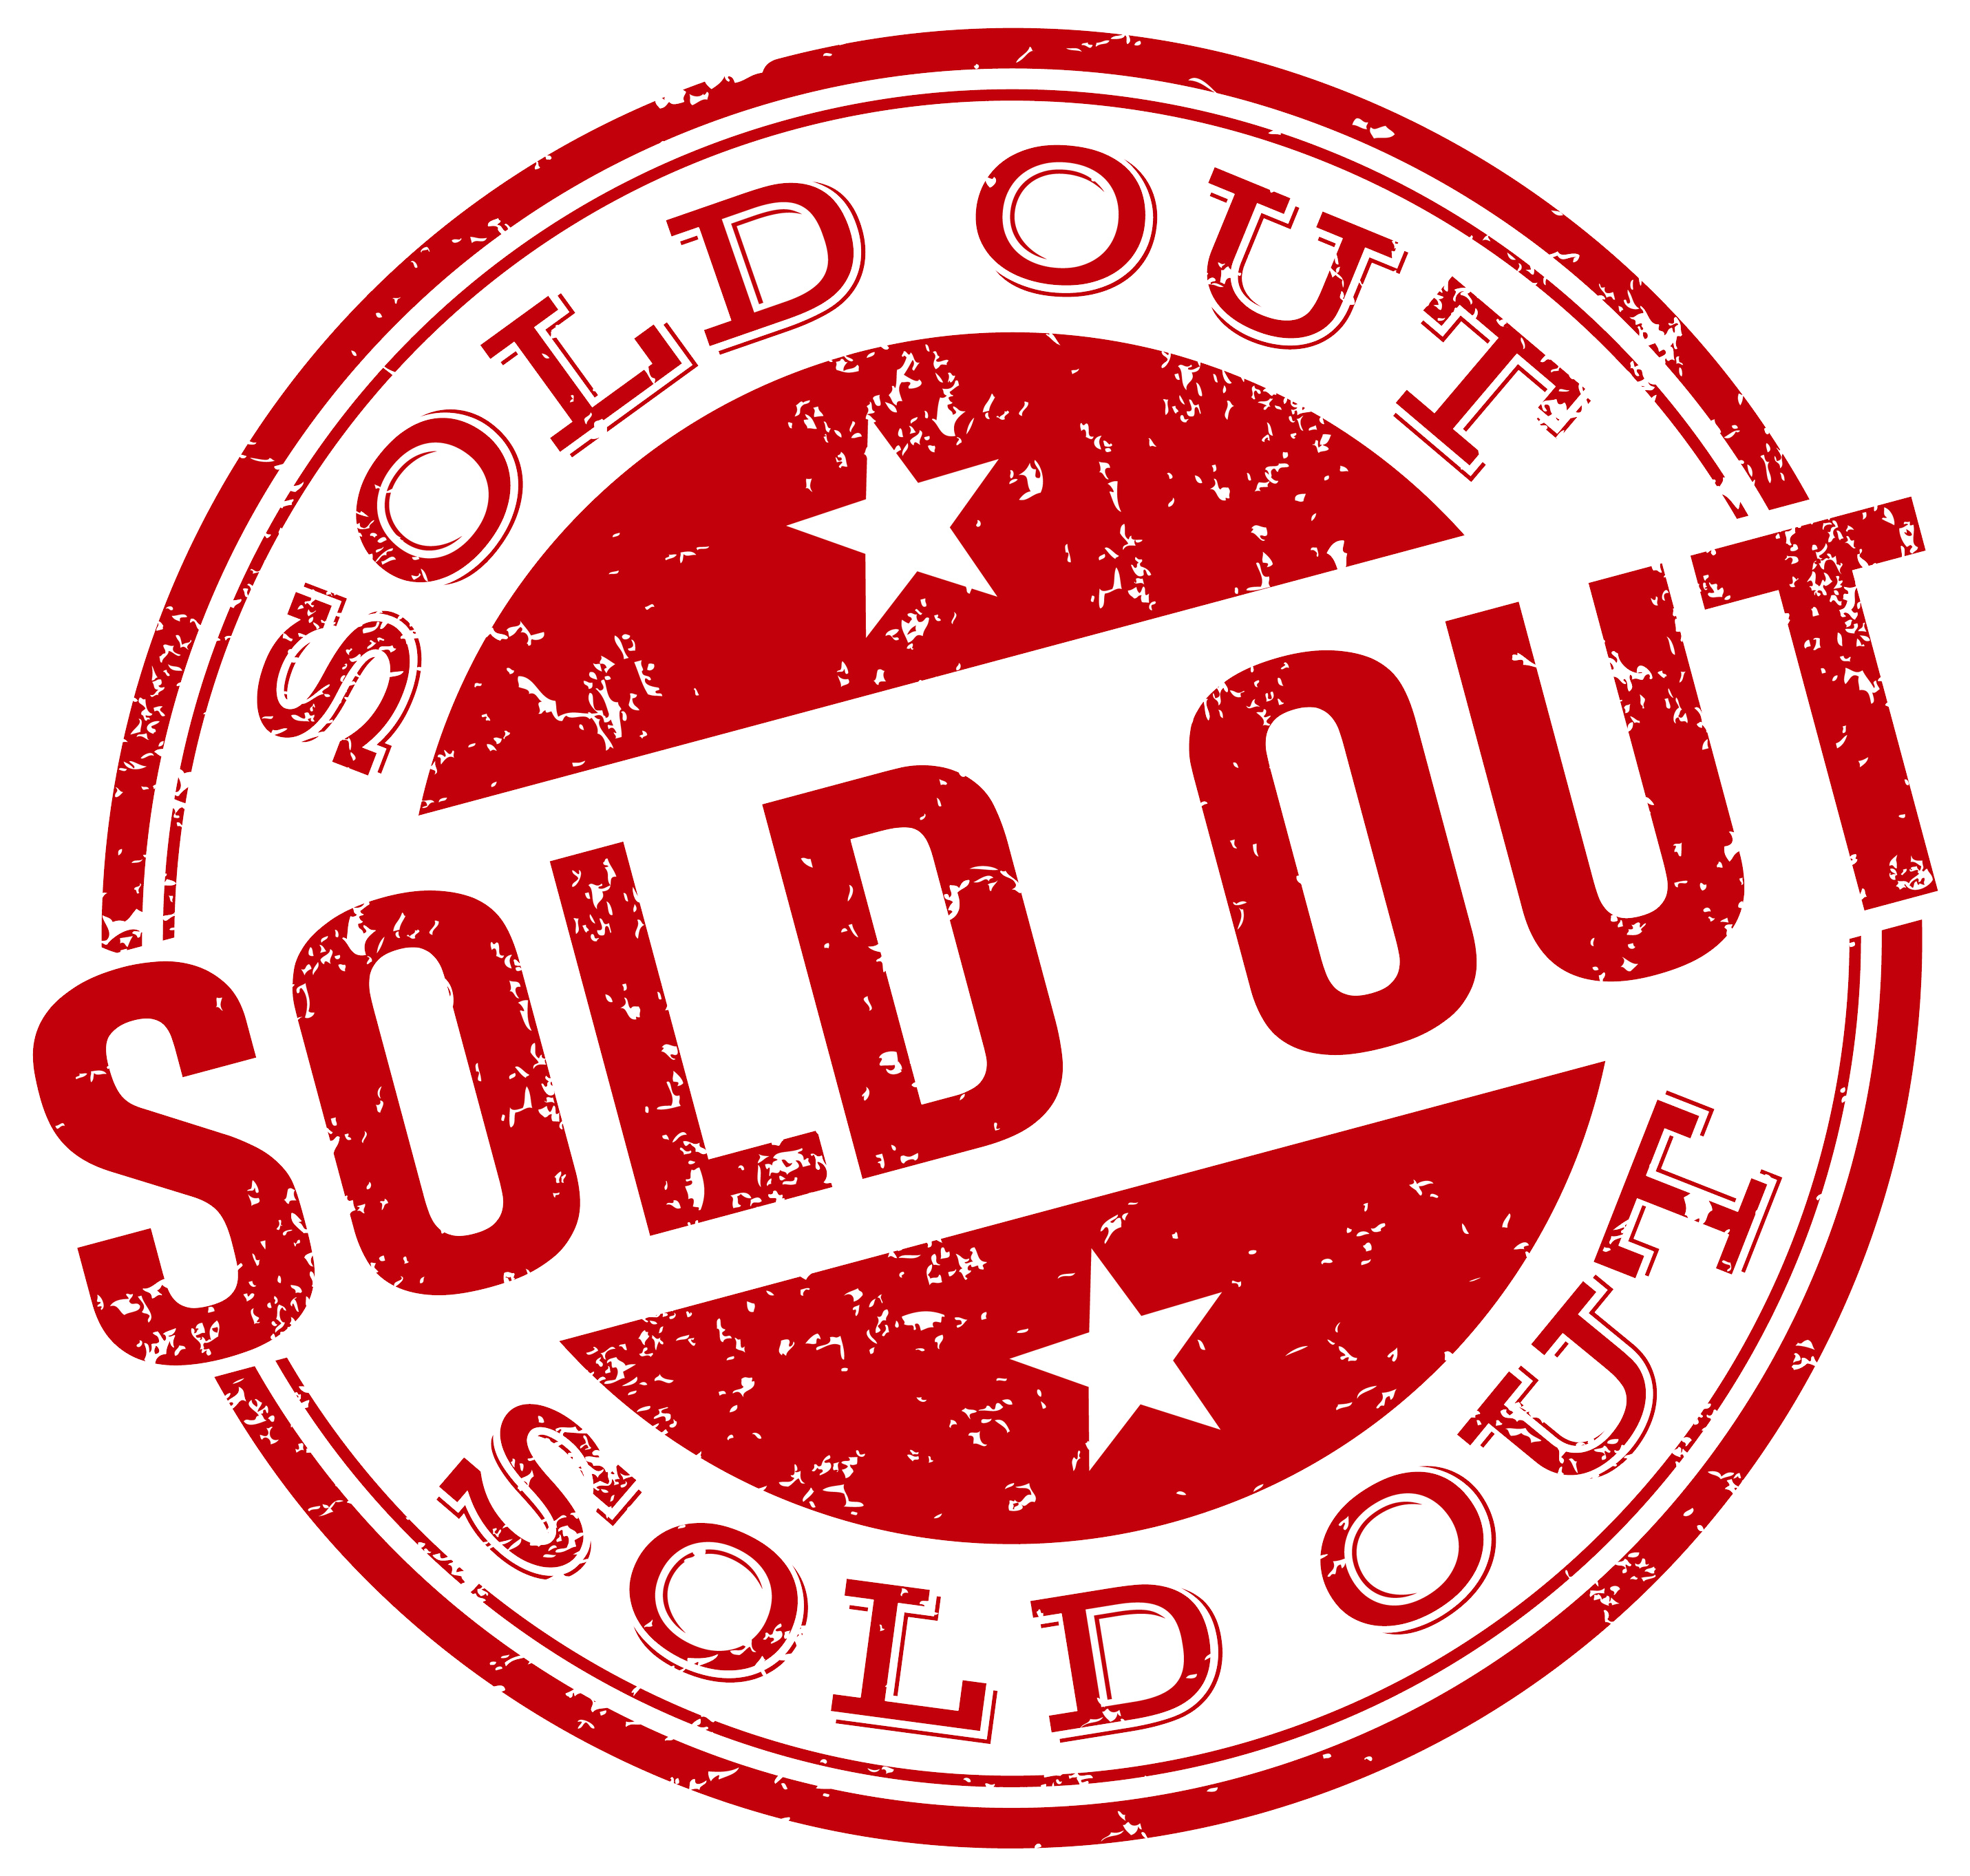 Sold out PNG transparent image download, size: 2862x2726px